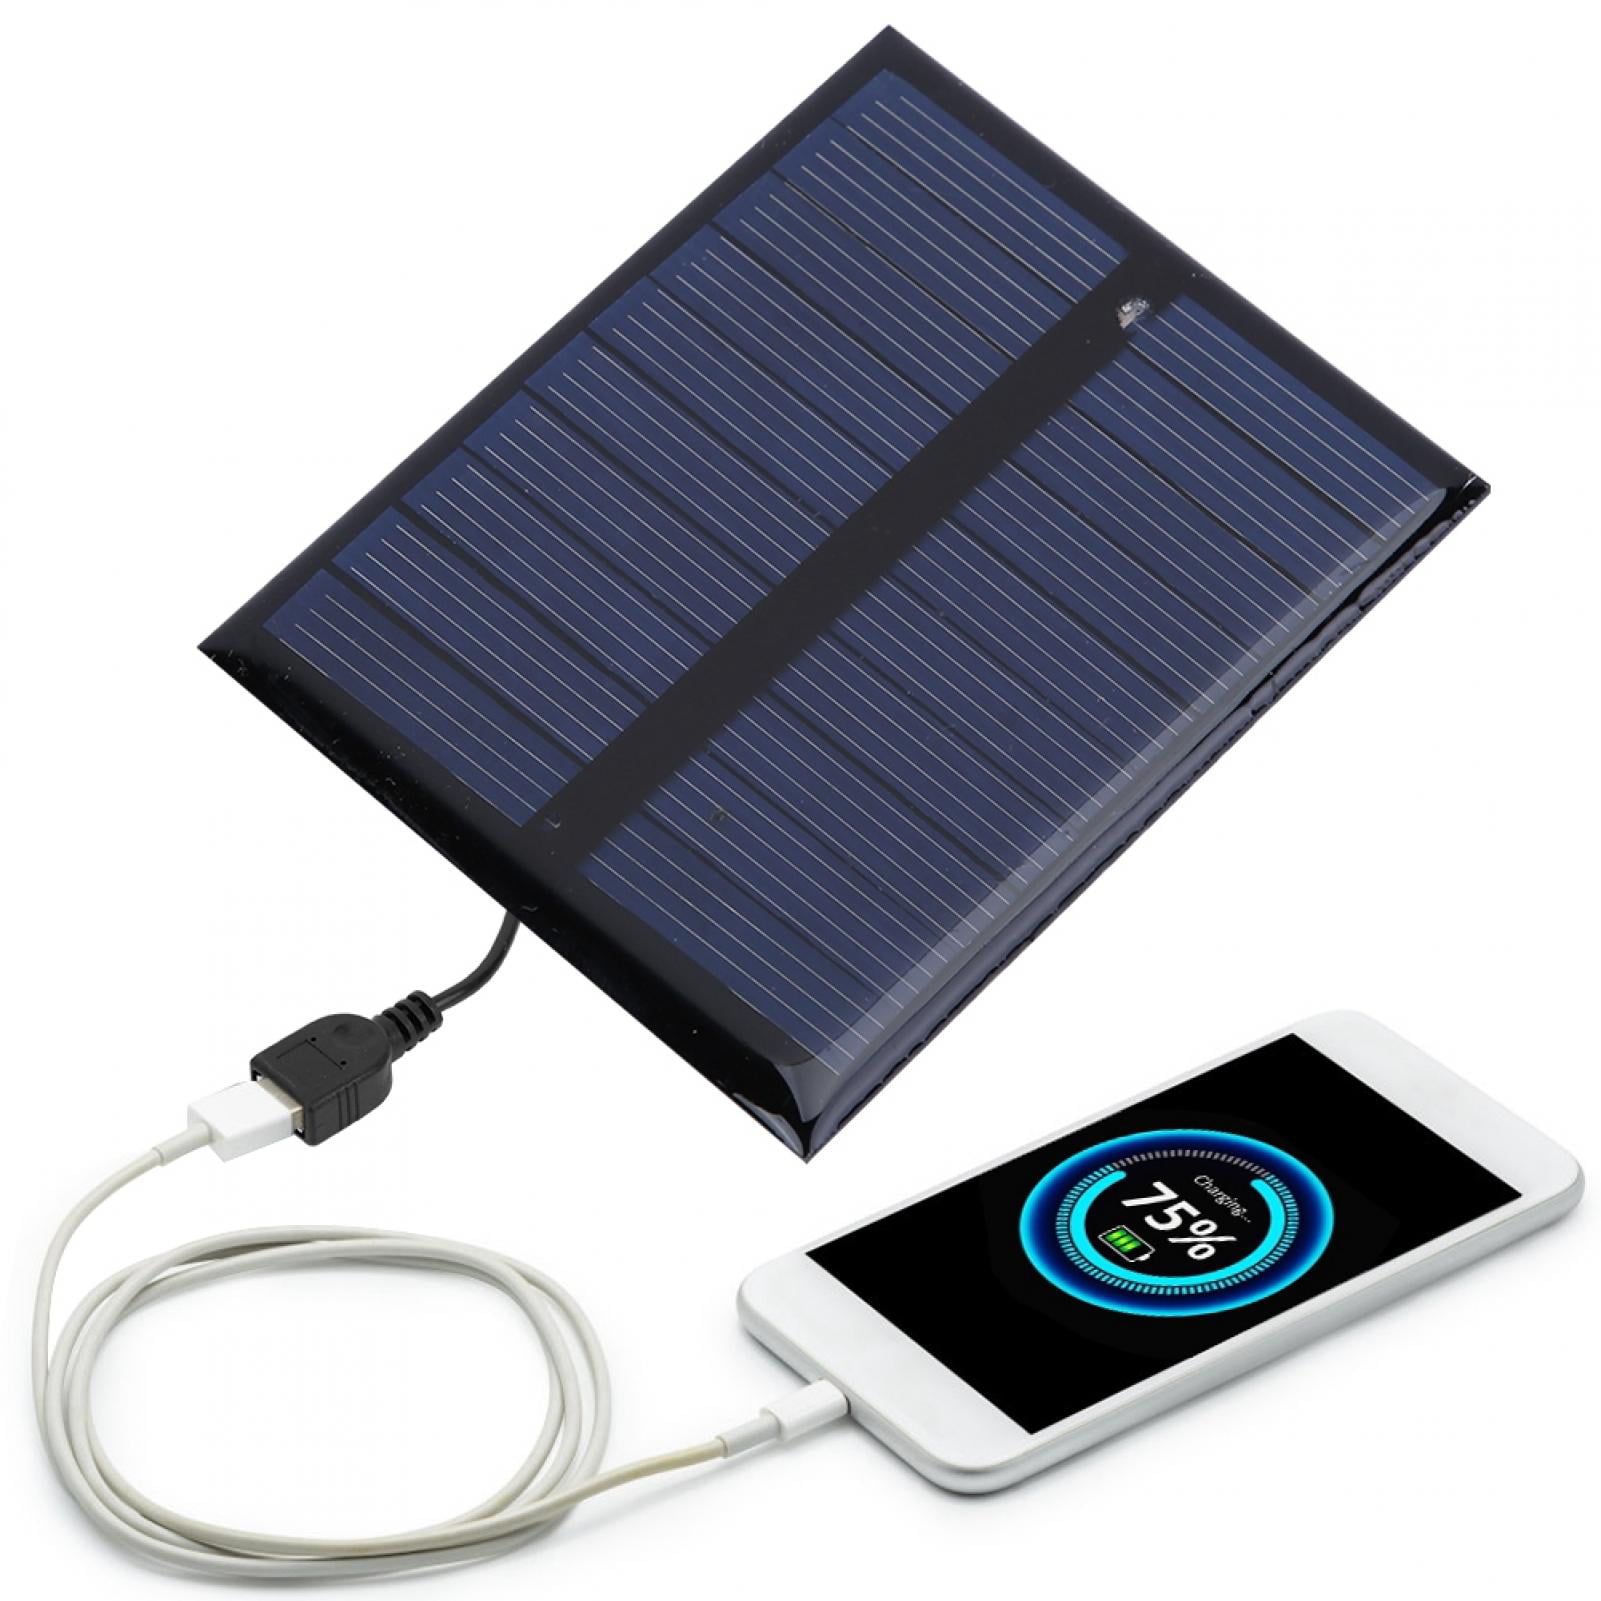 0.5W 5V Outdoor Portable High Efficiency Polysilicon Solar Panel Battery Charger 